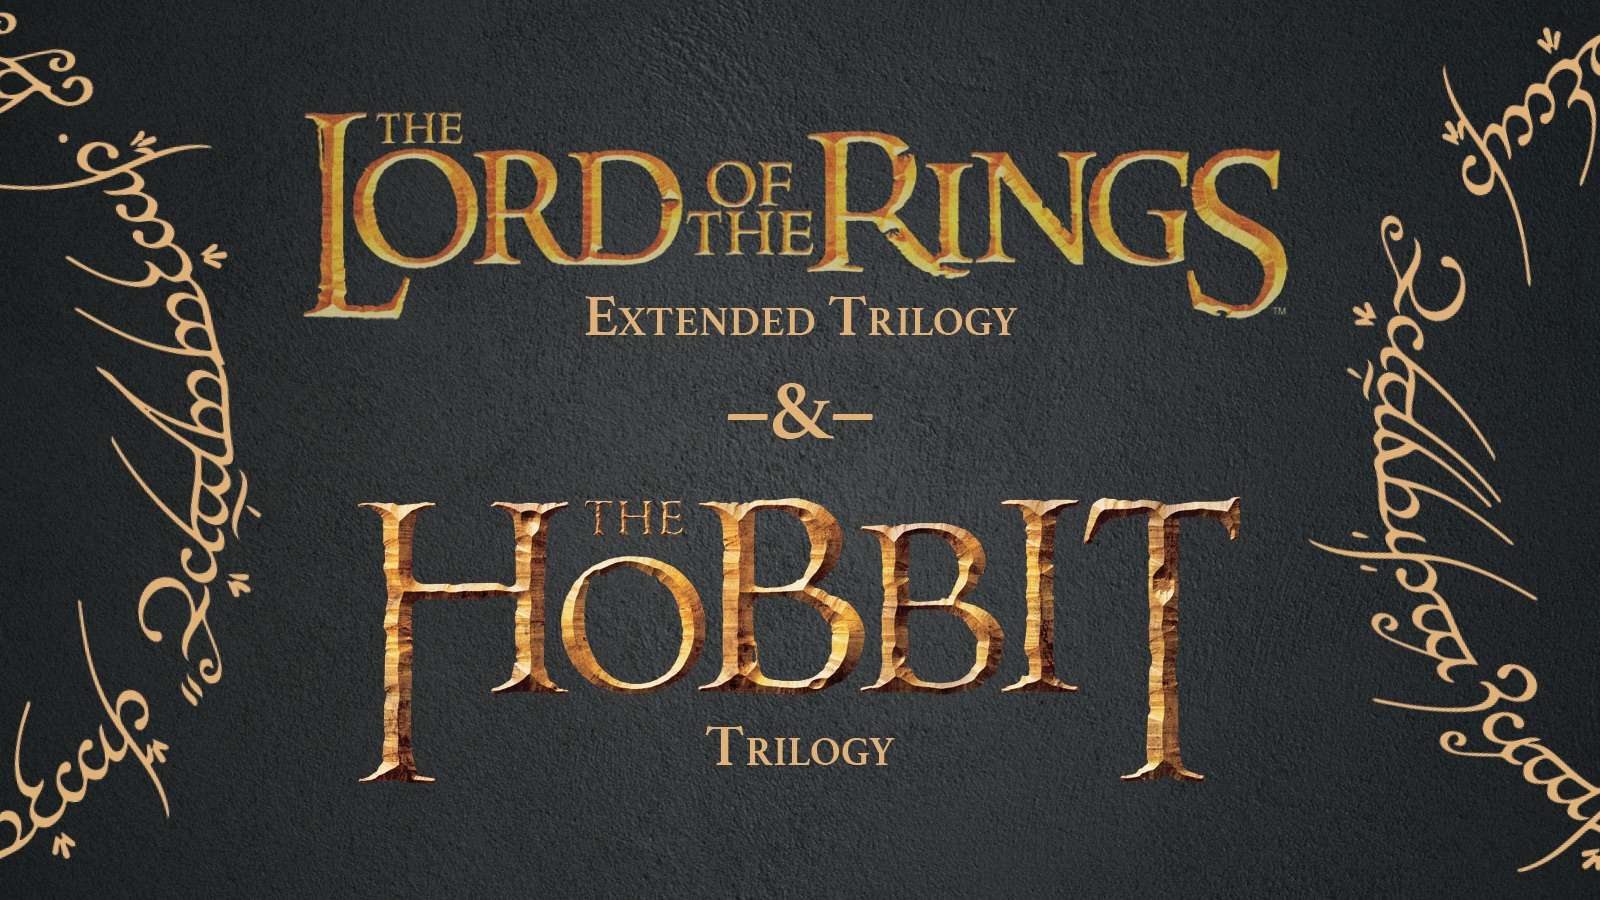 The Lord of the Rings Extended Trilogy and The Hobbit Trilogy